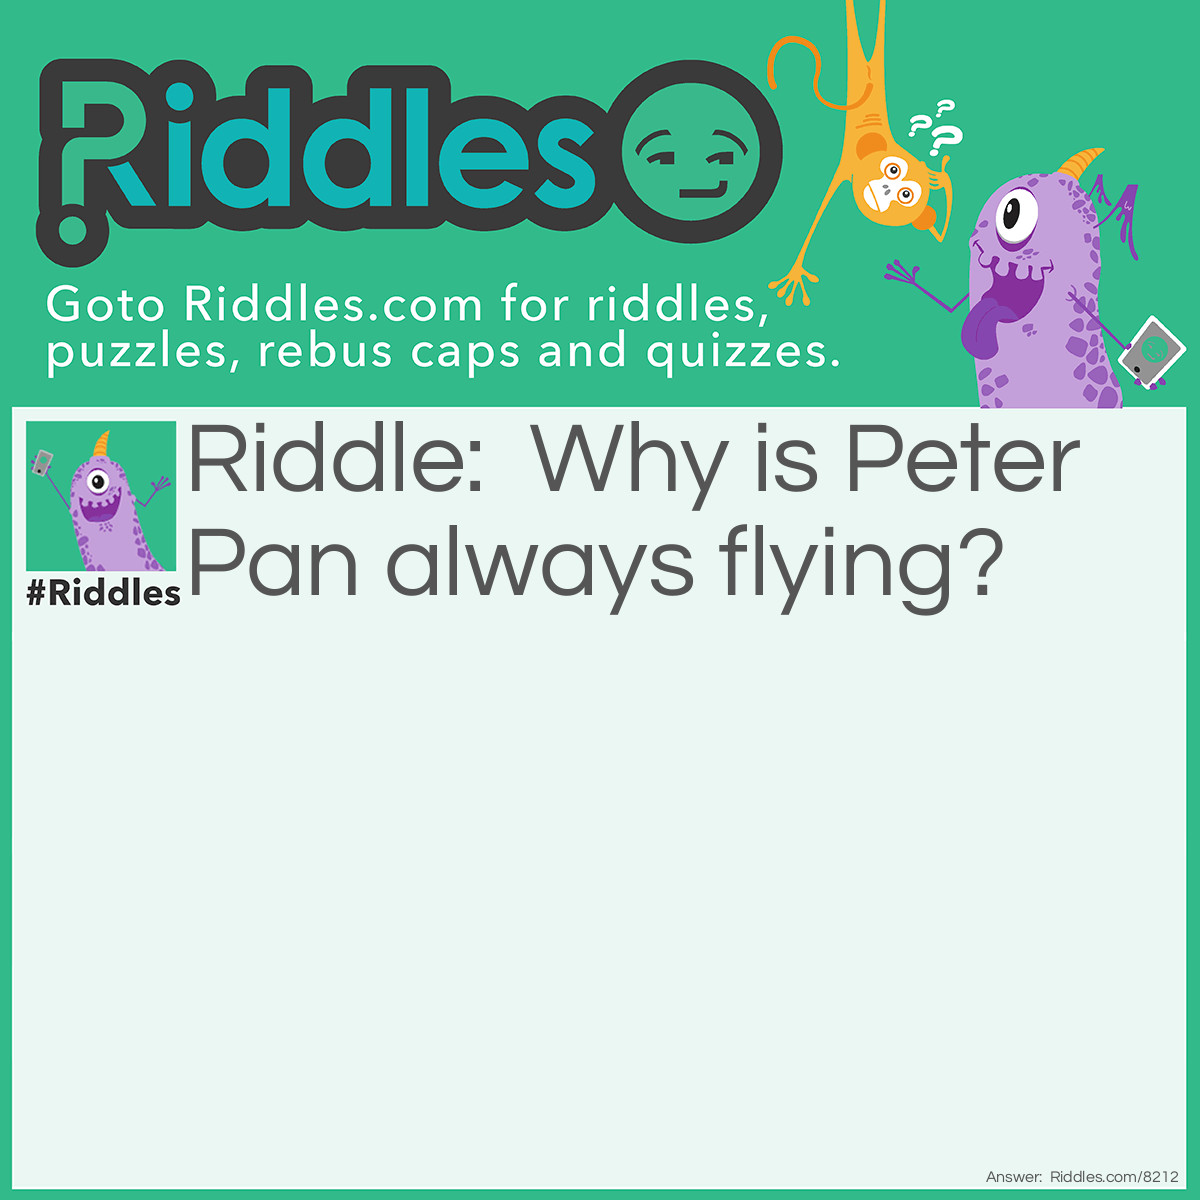 Riddle: Why is Peter Pan always flying? Answer: Because he neverlands!